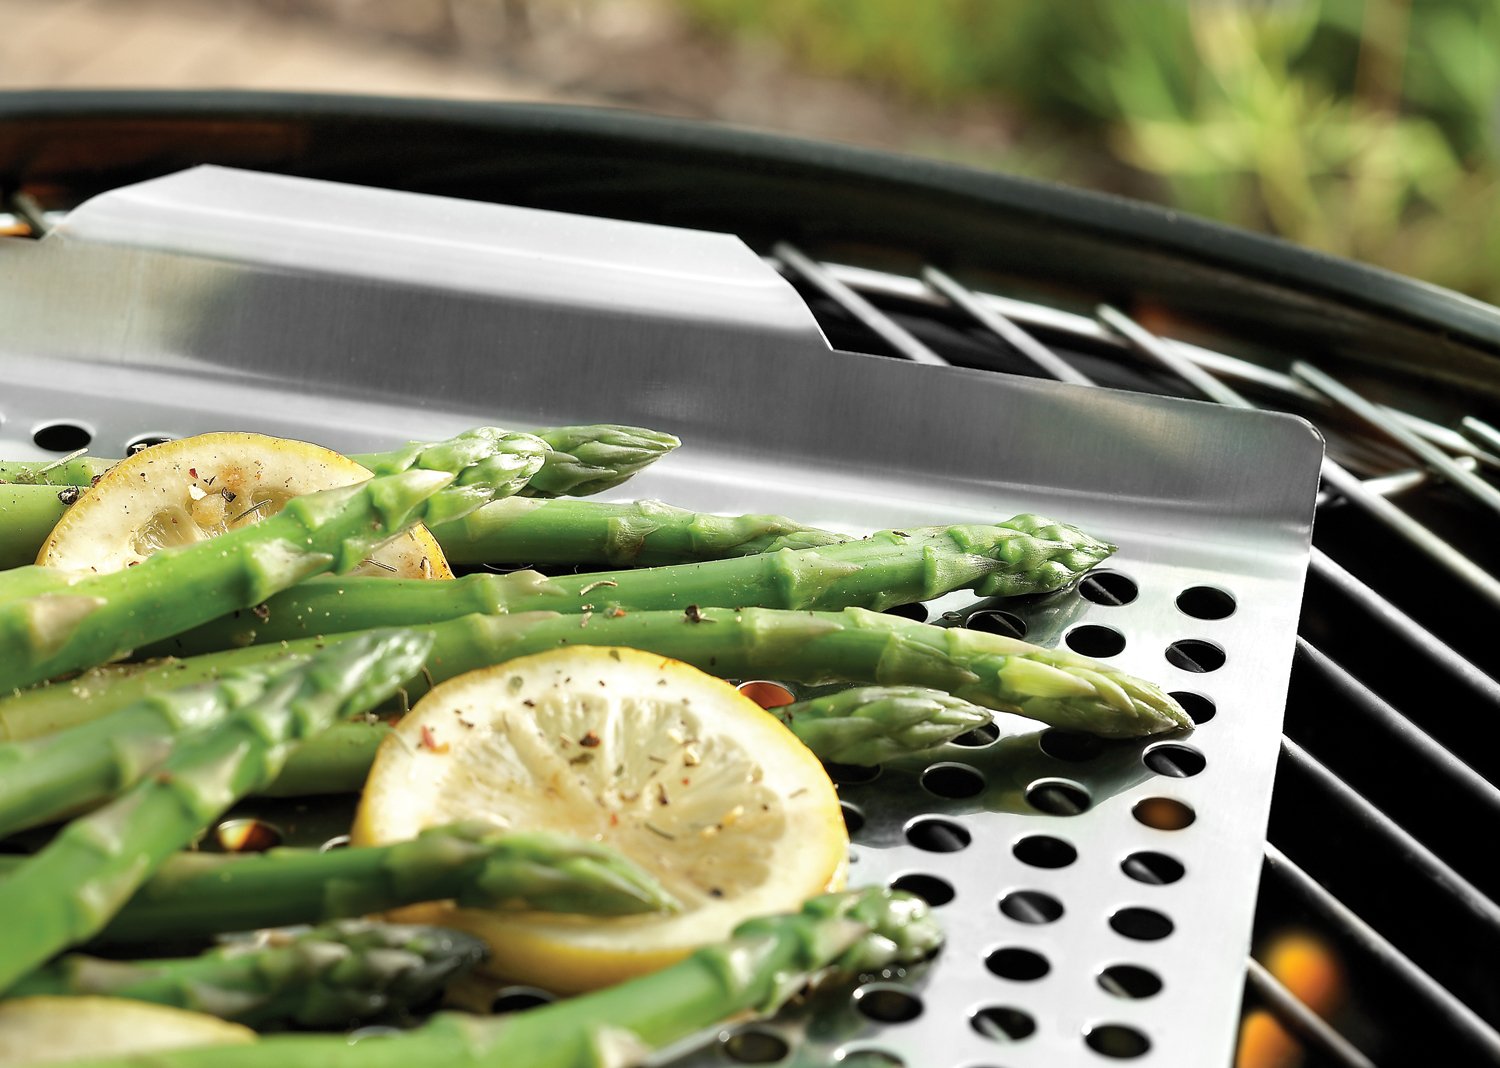 Outset Stainless Steel Grill Pan at